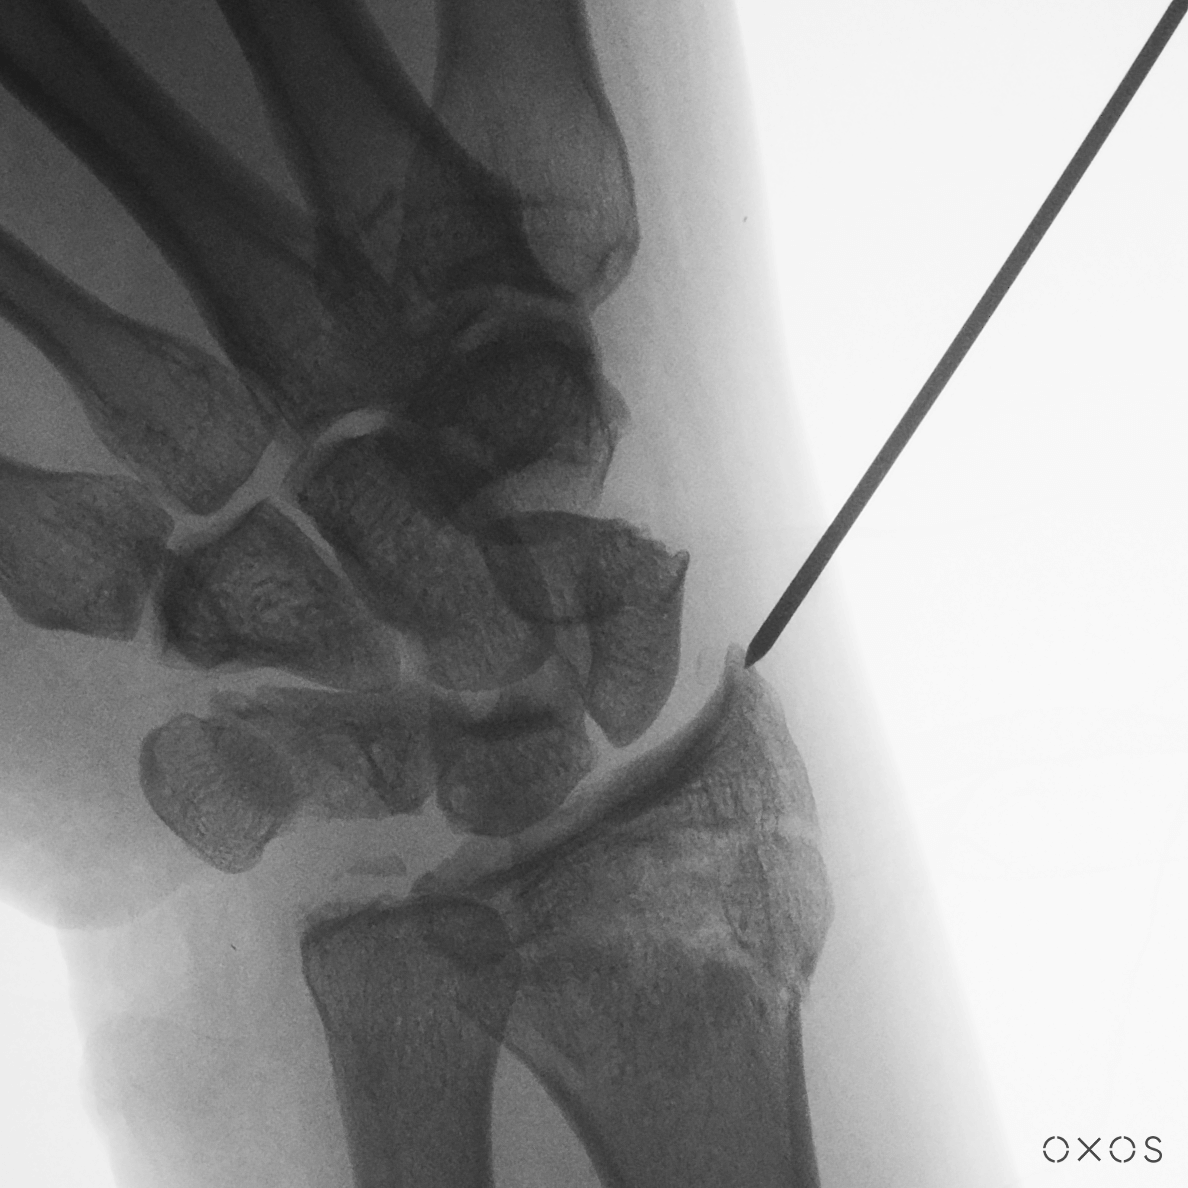 Image of Wrist Injection Using Micro C, 2.4 µGy